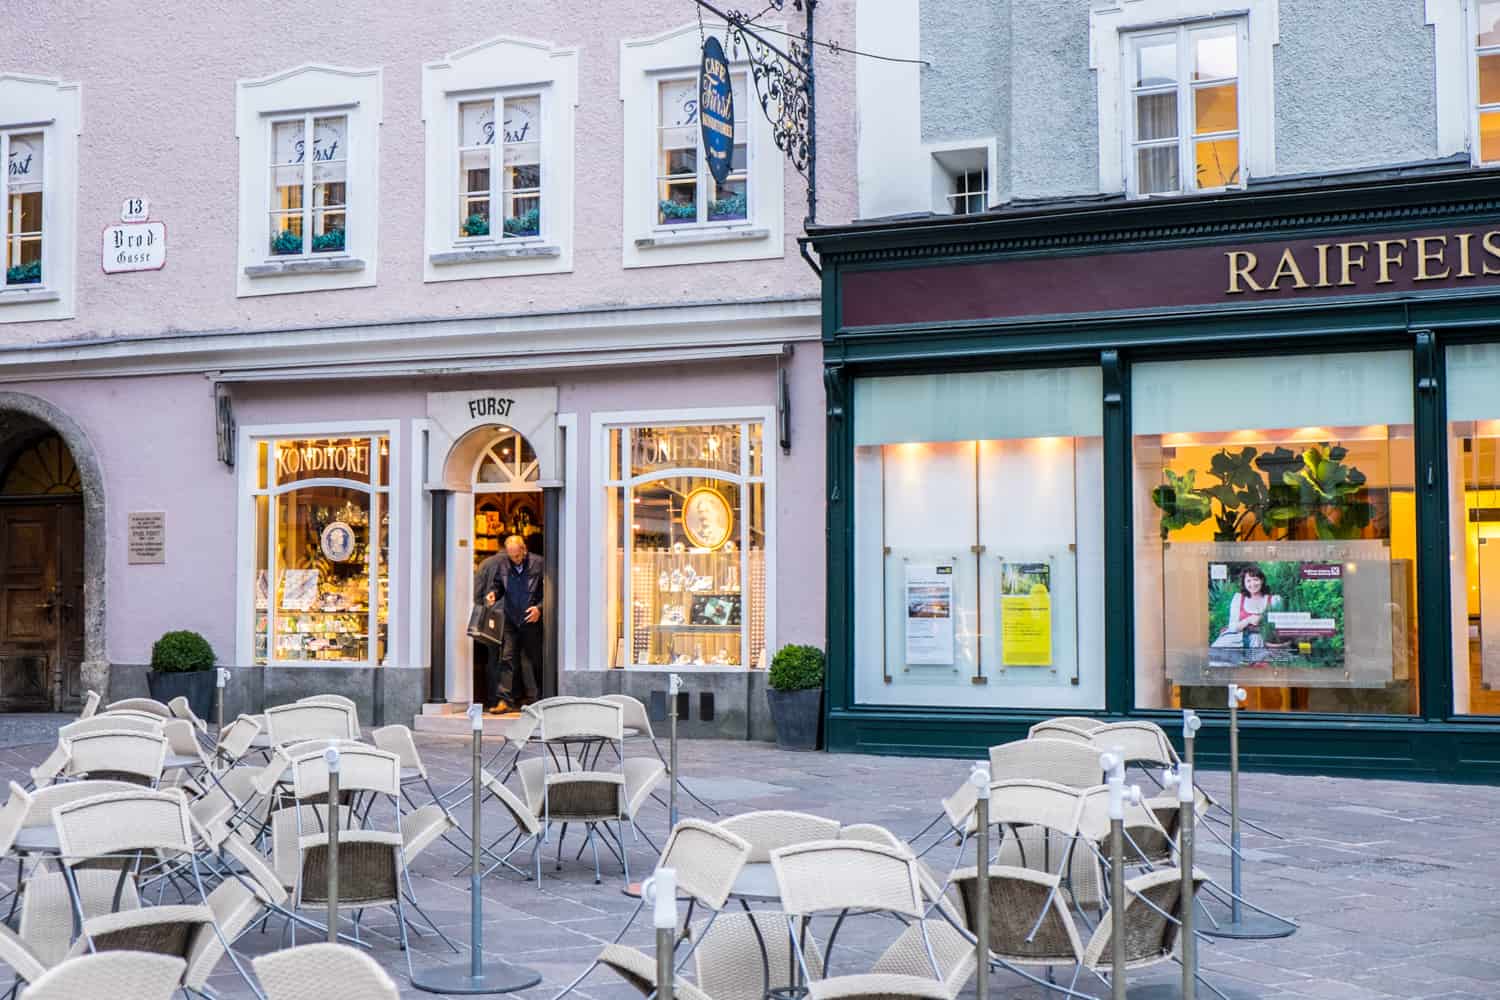 White chairs and tables outside a pink building with white window trims, golden lights and the name over the door arch: "Fürst" - a famous chocolate shop in Salzburg. 